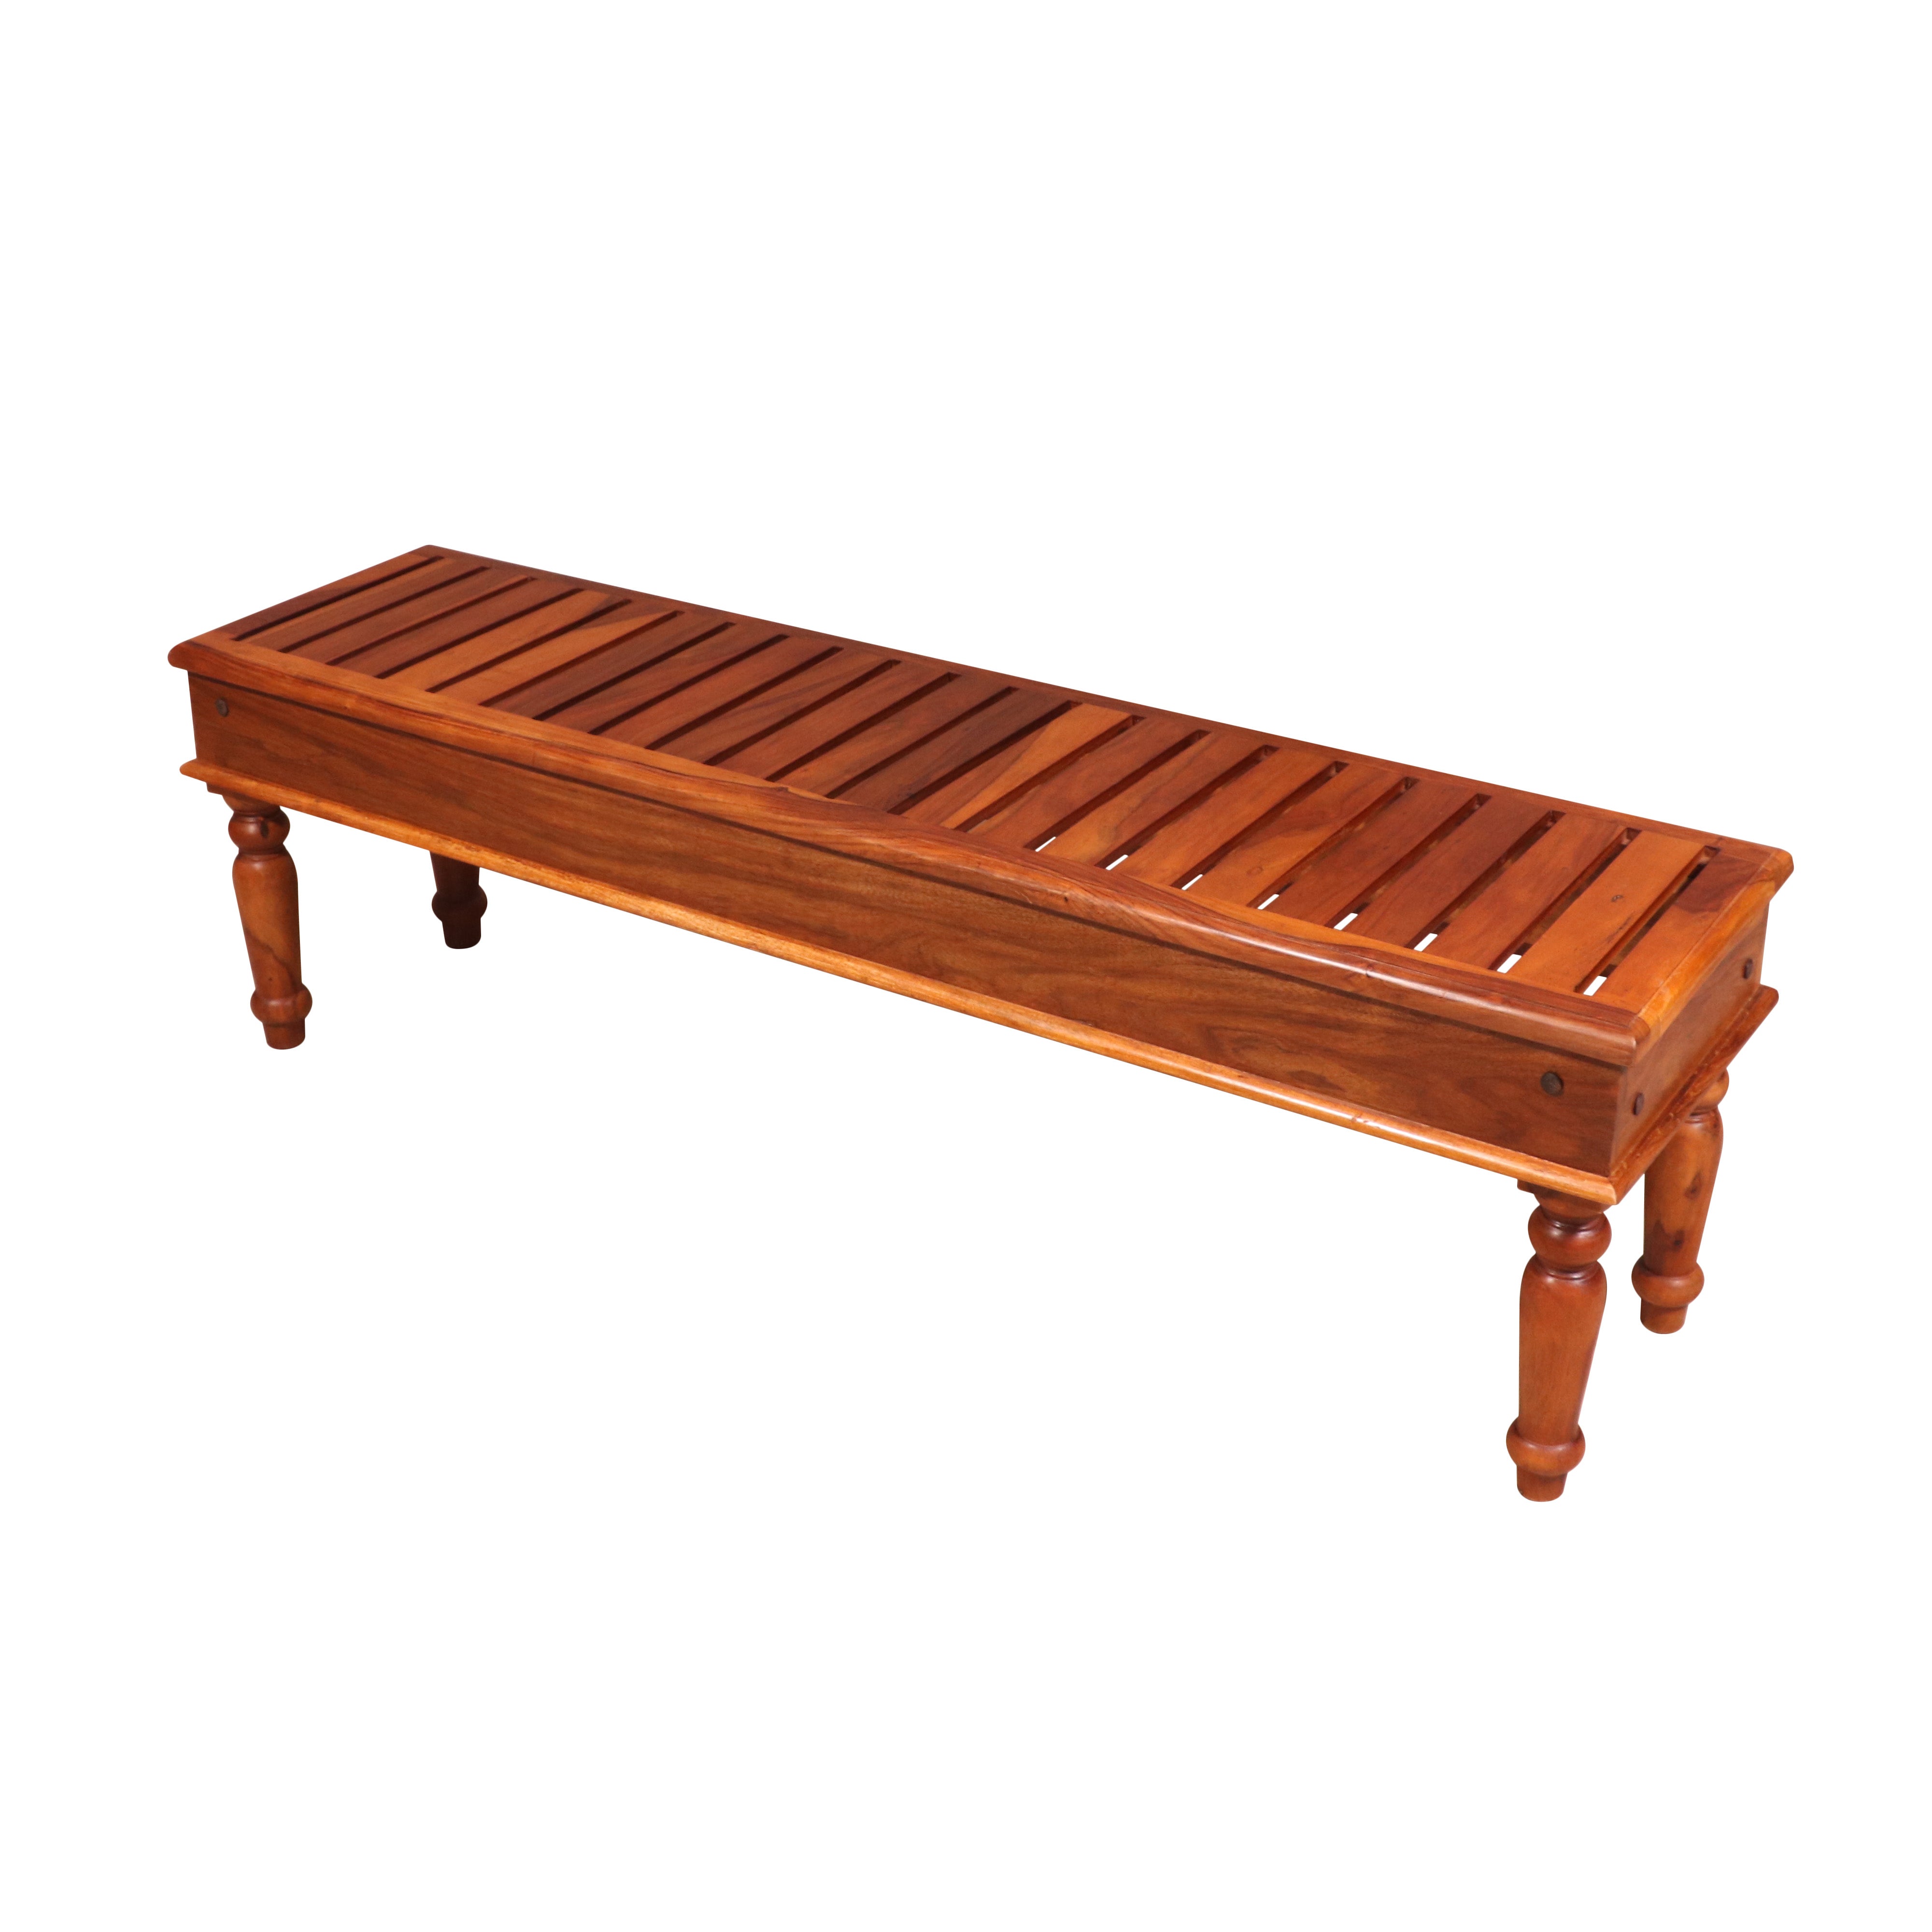 Solid wood strip concept 5ft seating bench Bench